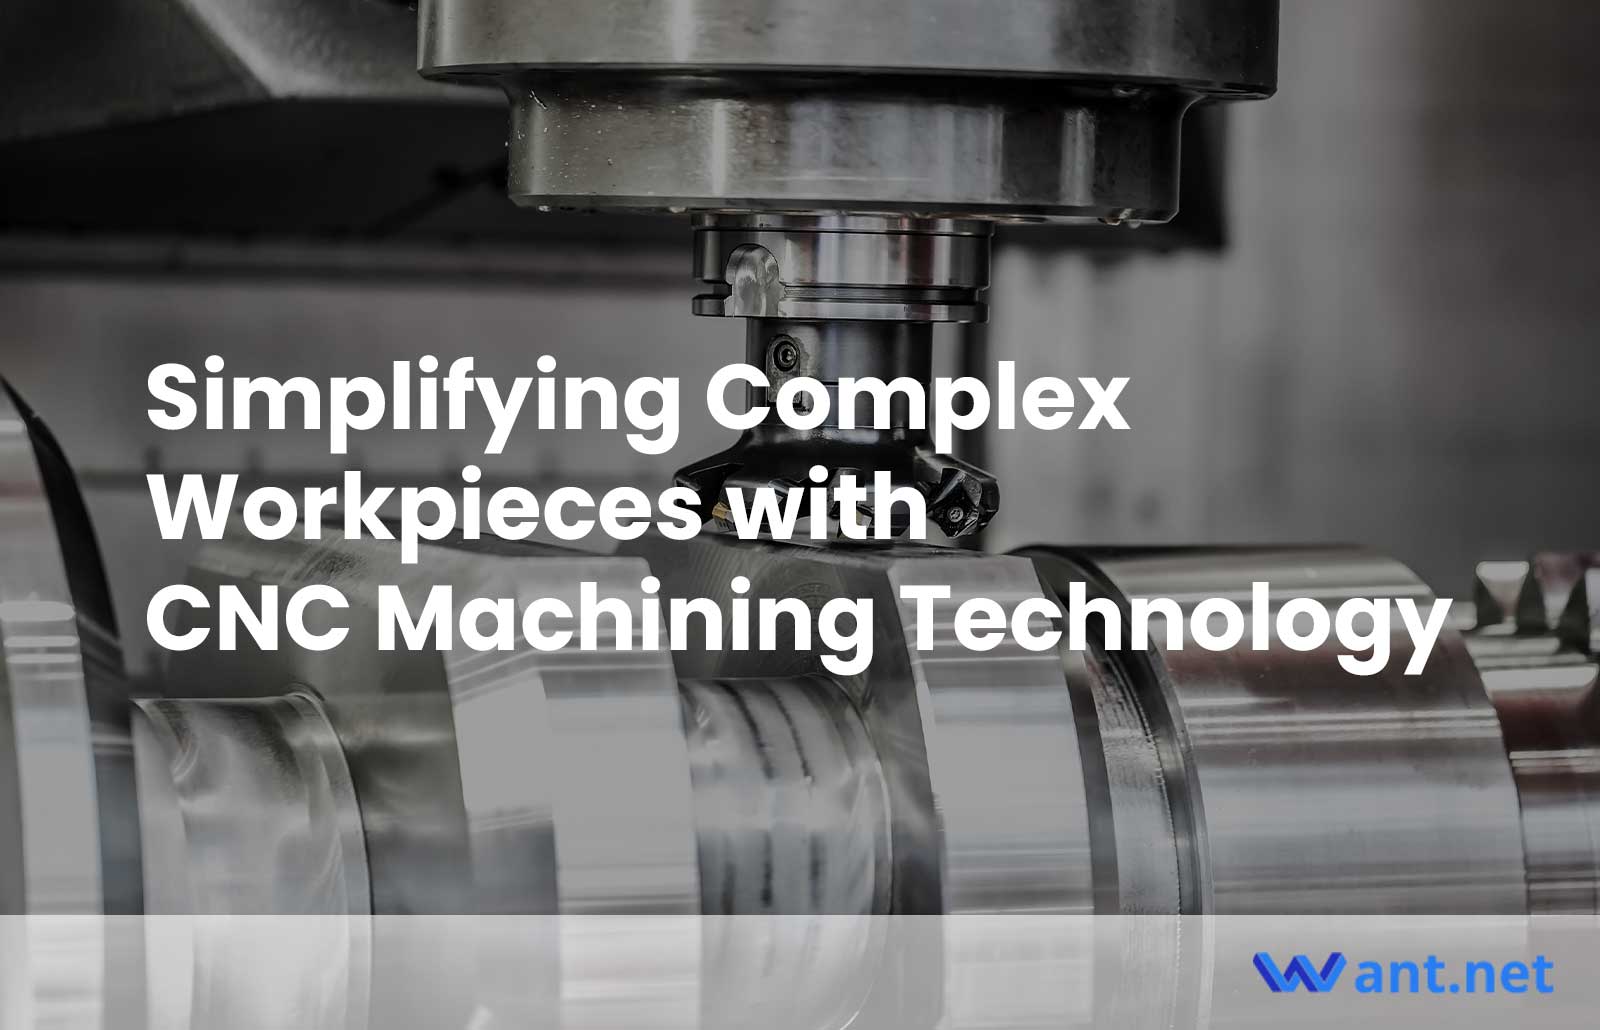 Simplifying Complex Workpieces with CNC Machining Technology